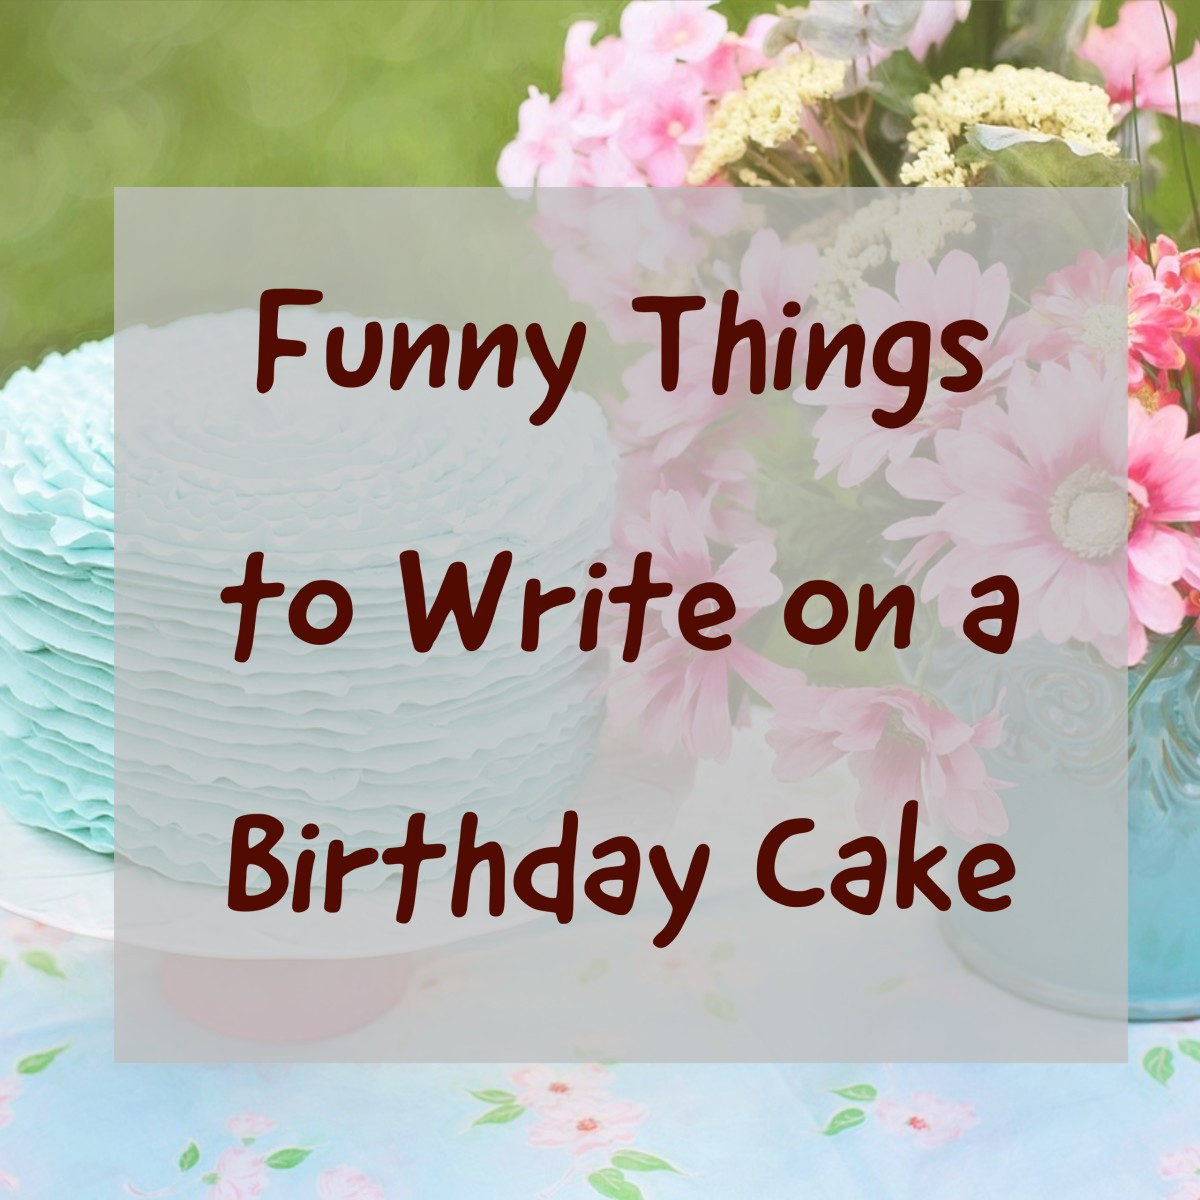 Funny Birthday Cake Sayings
 Over 100 Funny Things to Write on a Birthday Cake